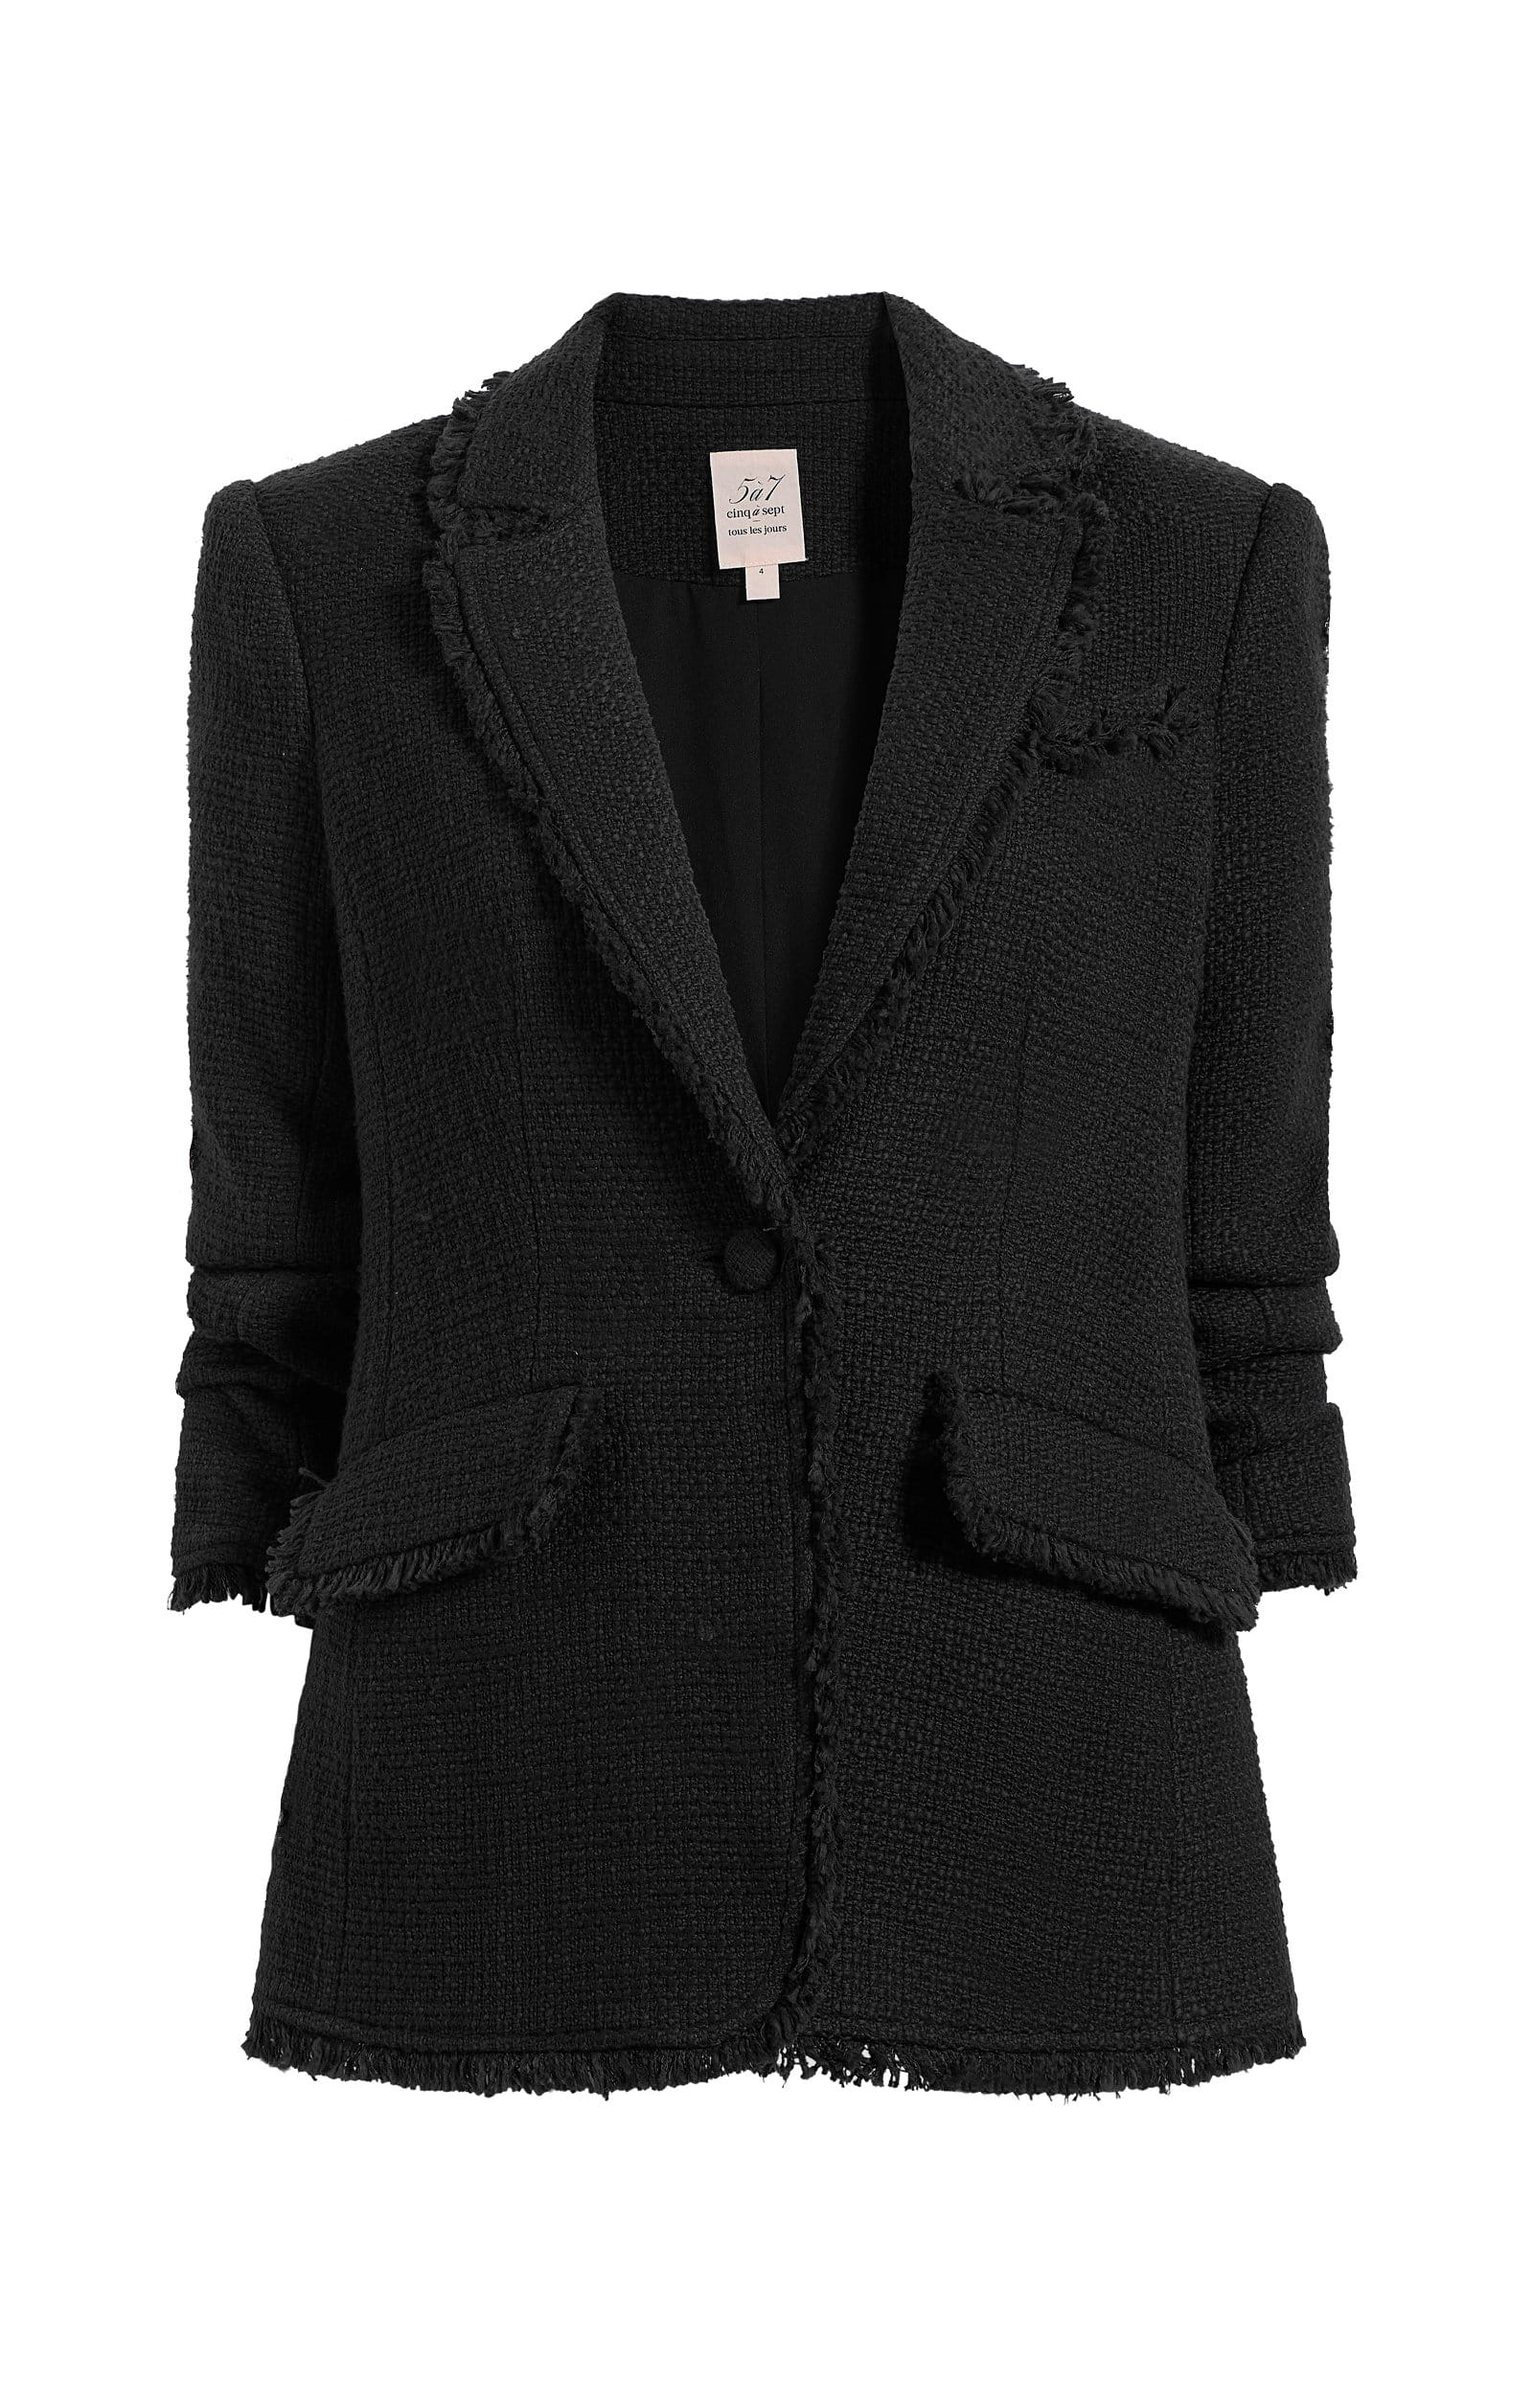 https://cinqasept.nyc/collections/5-a-7-essentials/products/boucle-khloe-blazer-in-black